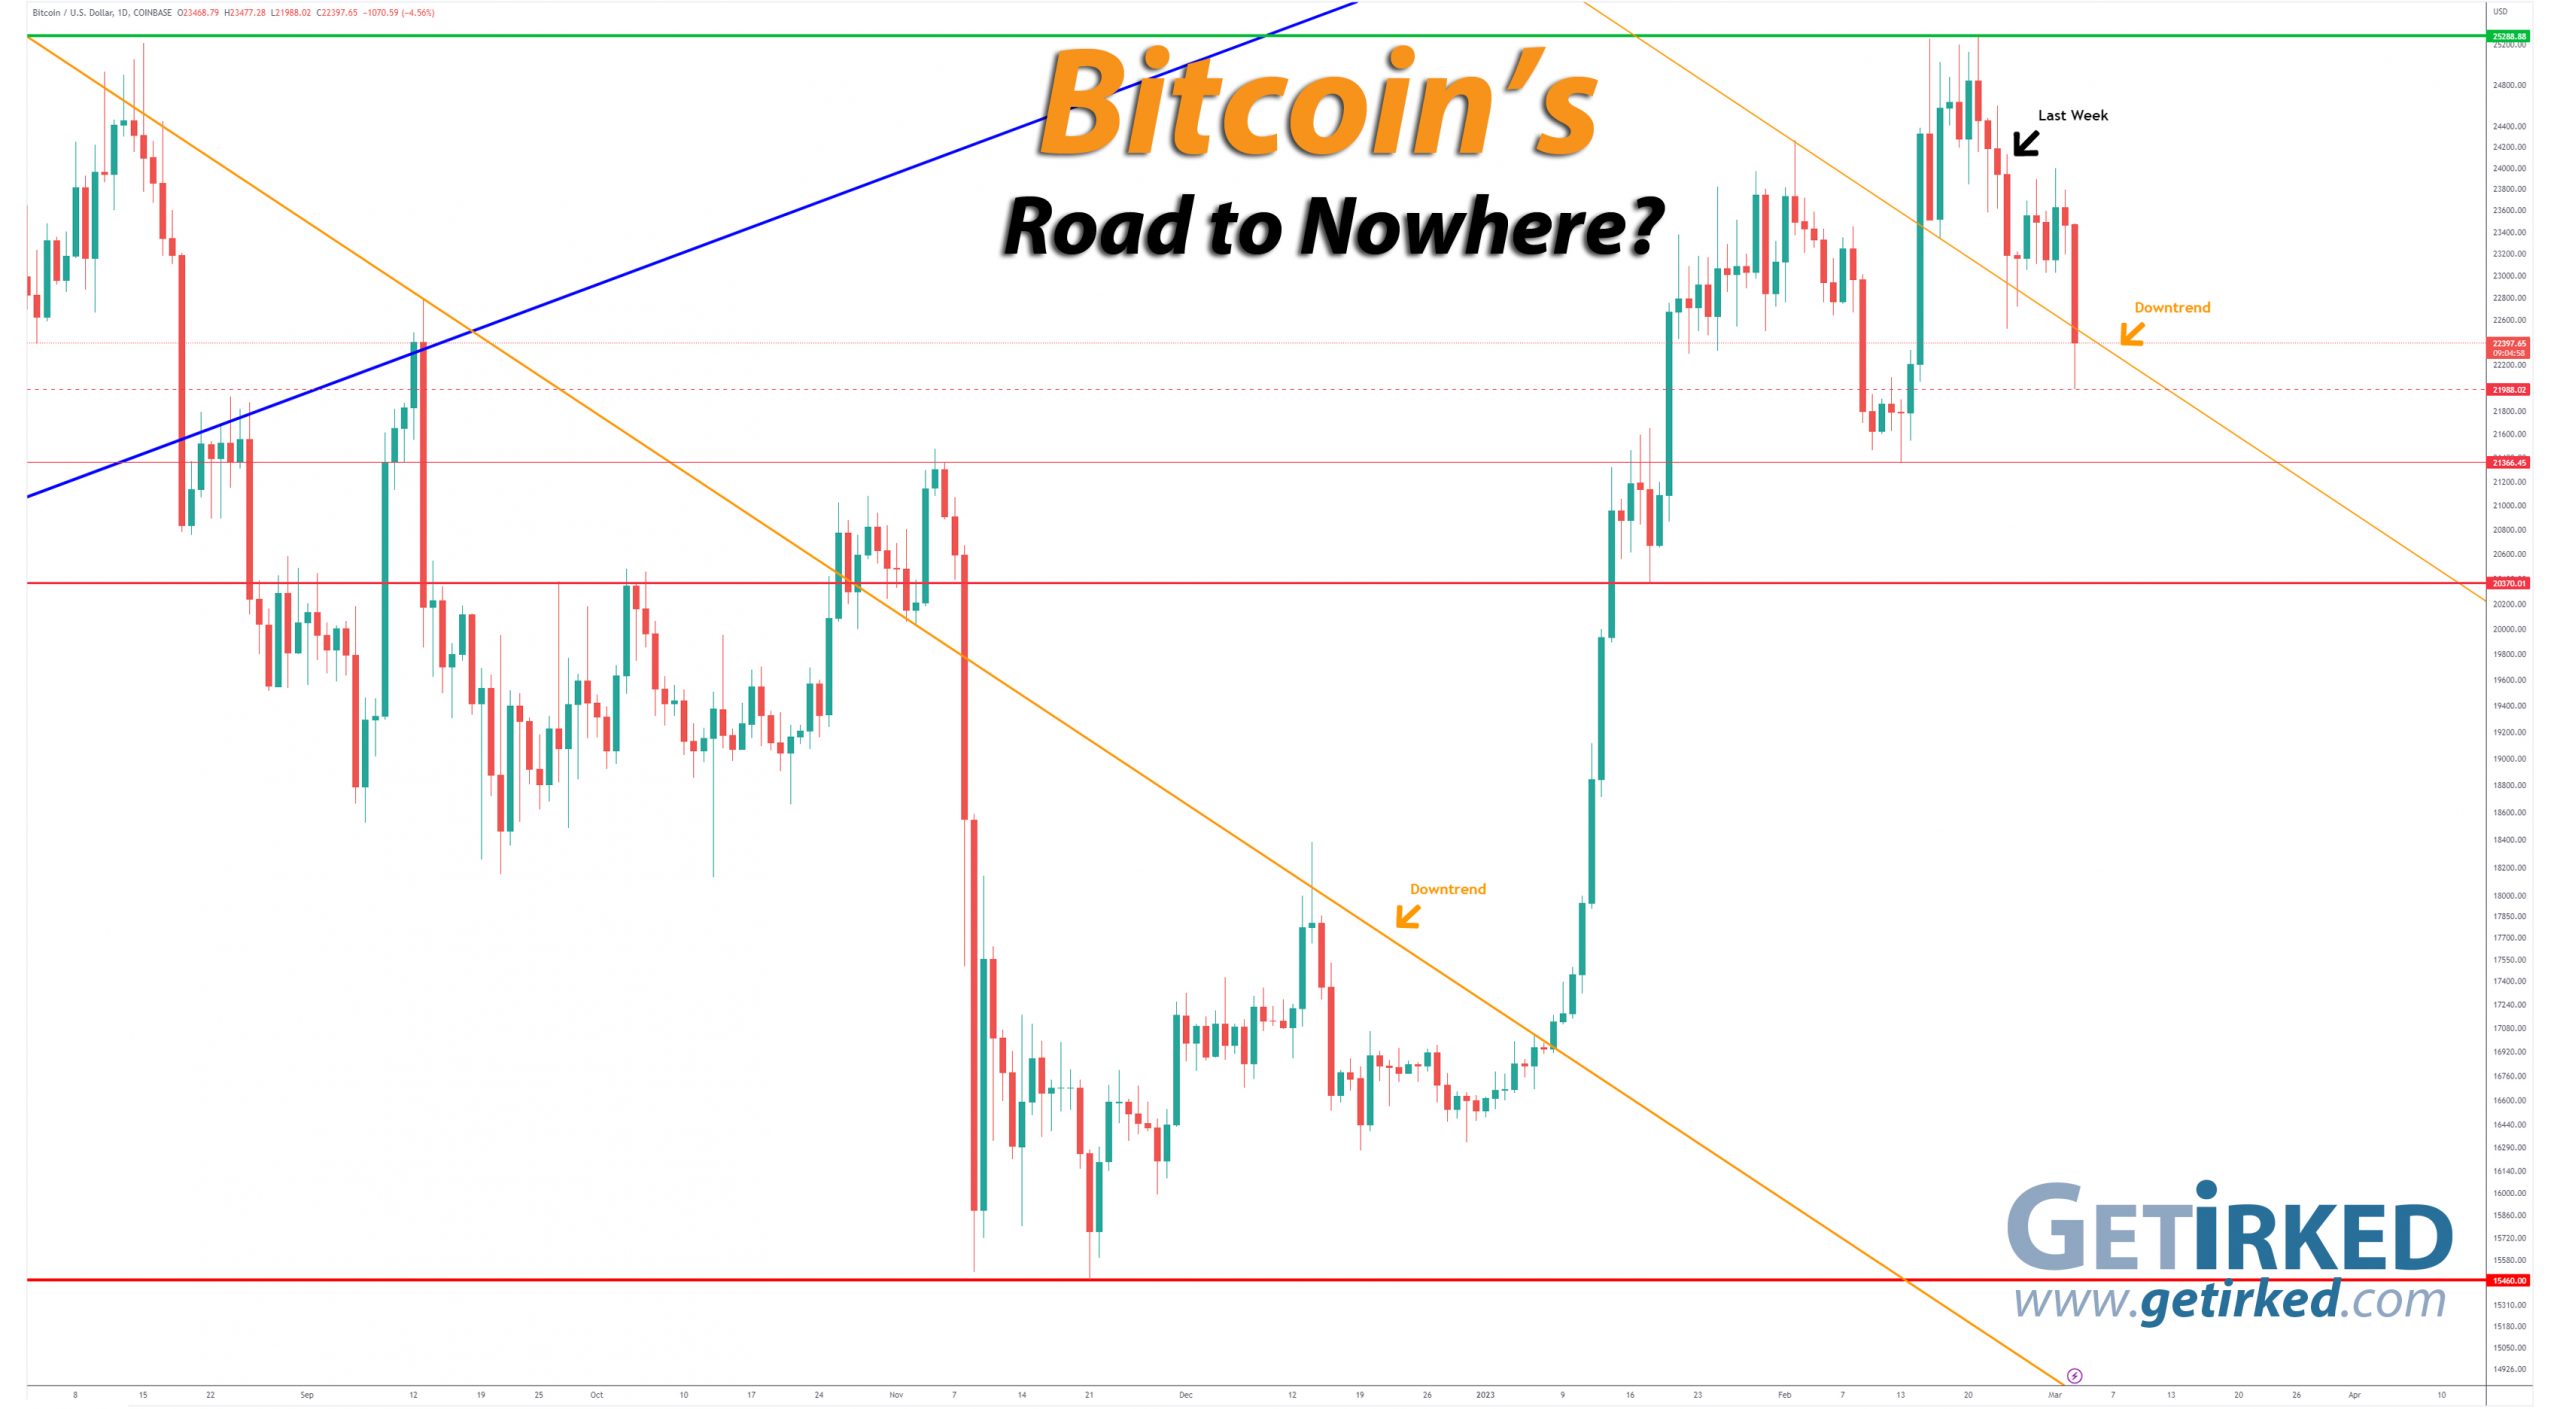 Bitcoin's Road to Nowhere - Get Irked